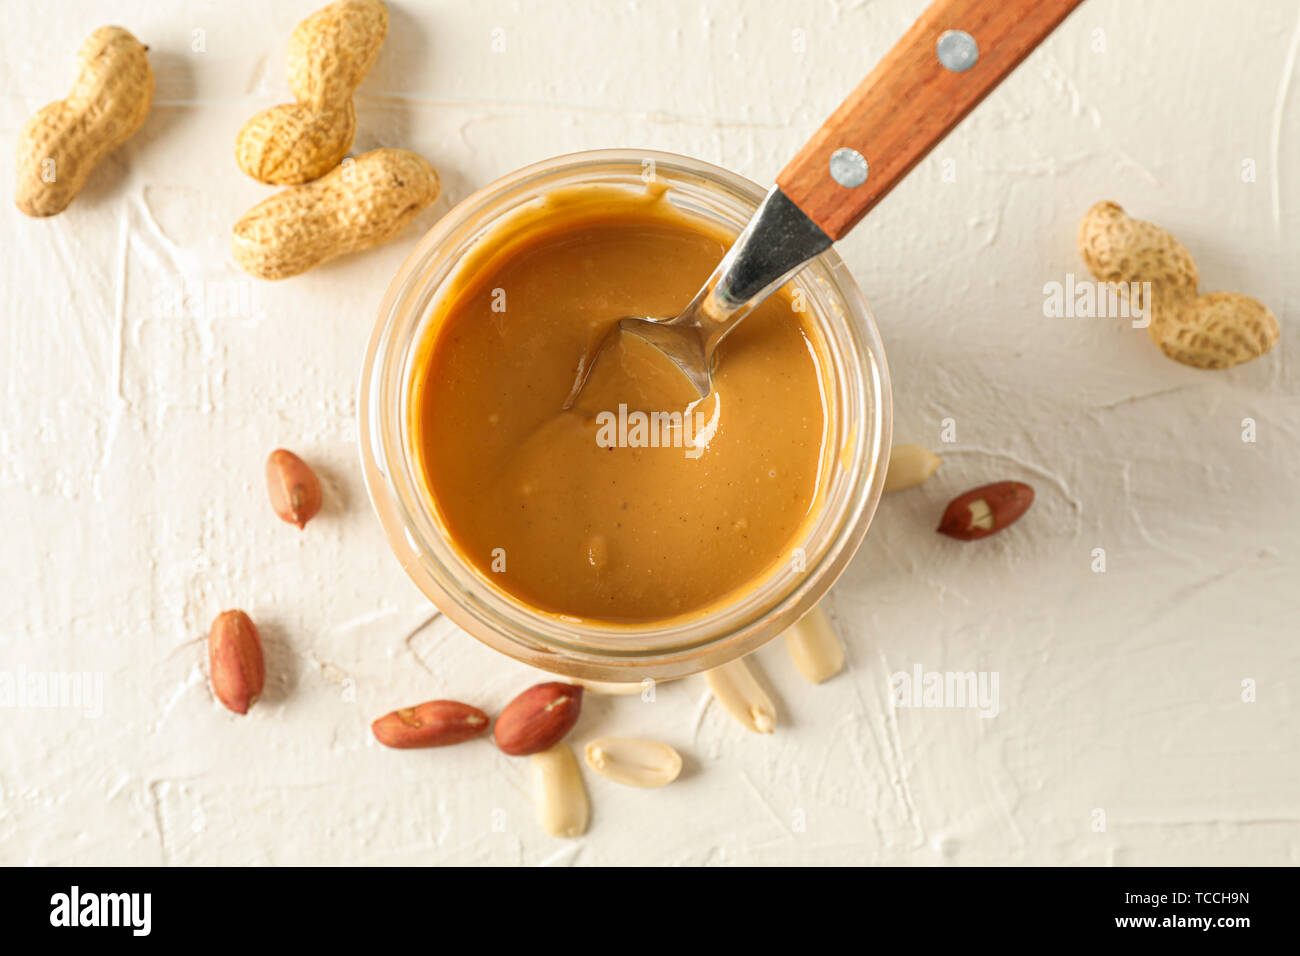 https://c8.alamy.com/comp/TCCH9N/glass-jar-with-creamy-peanut-butter-and-spoon-and-peanut-on-white-background-space-for-text-and-top-view-TCCH9N.jpg